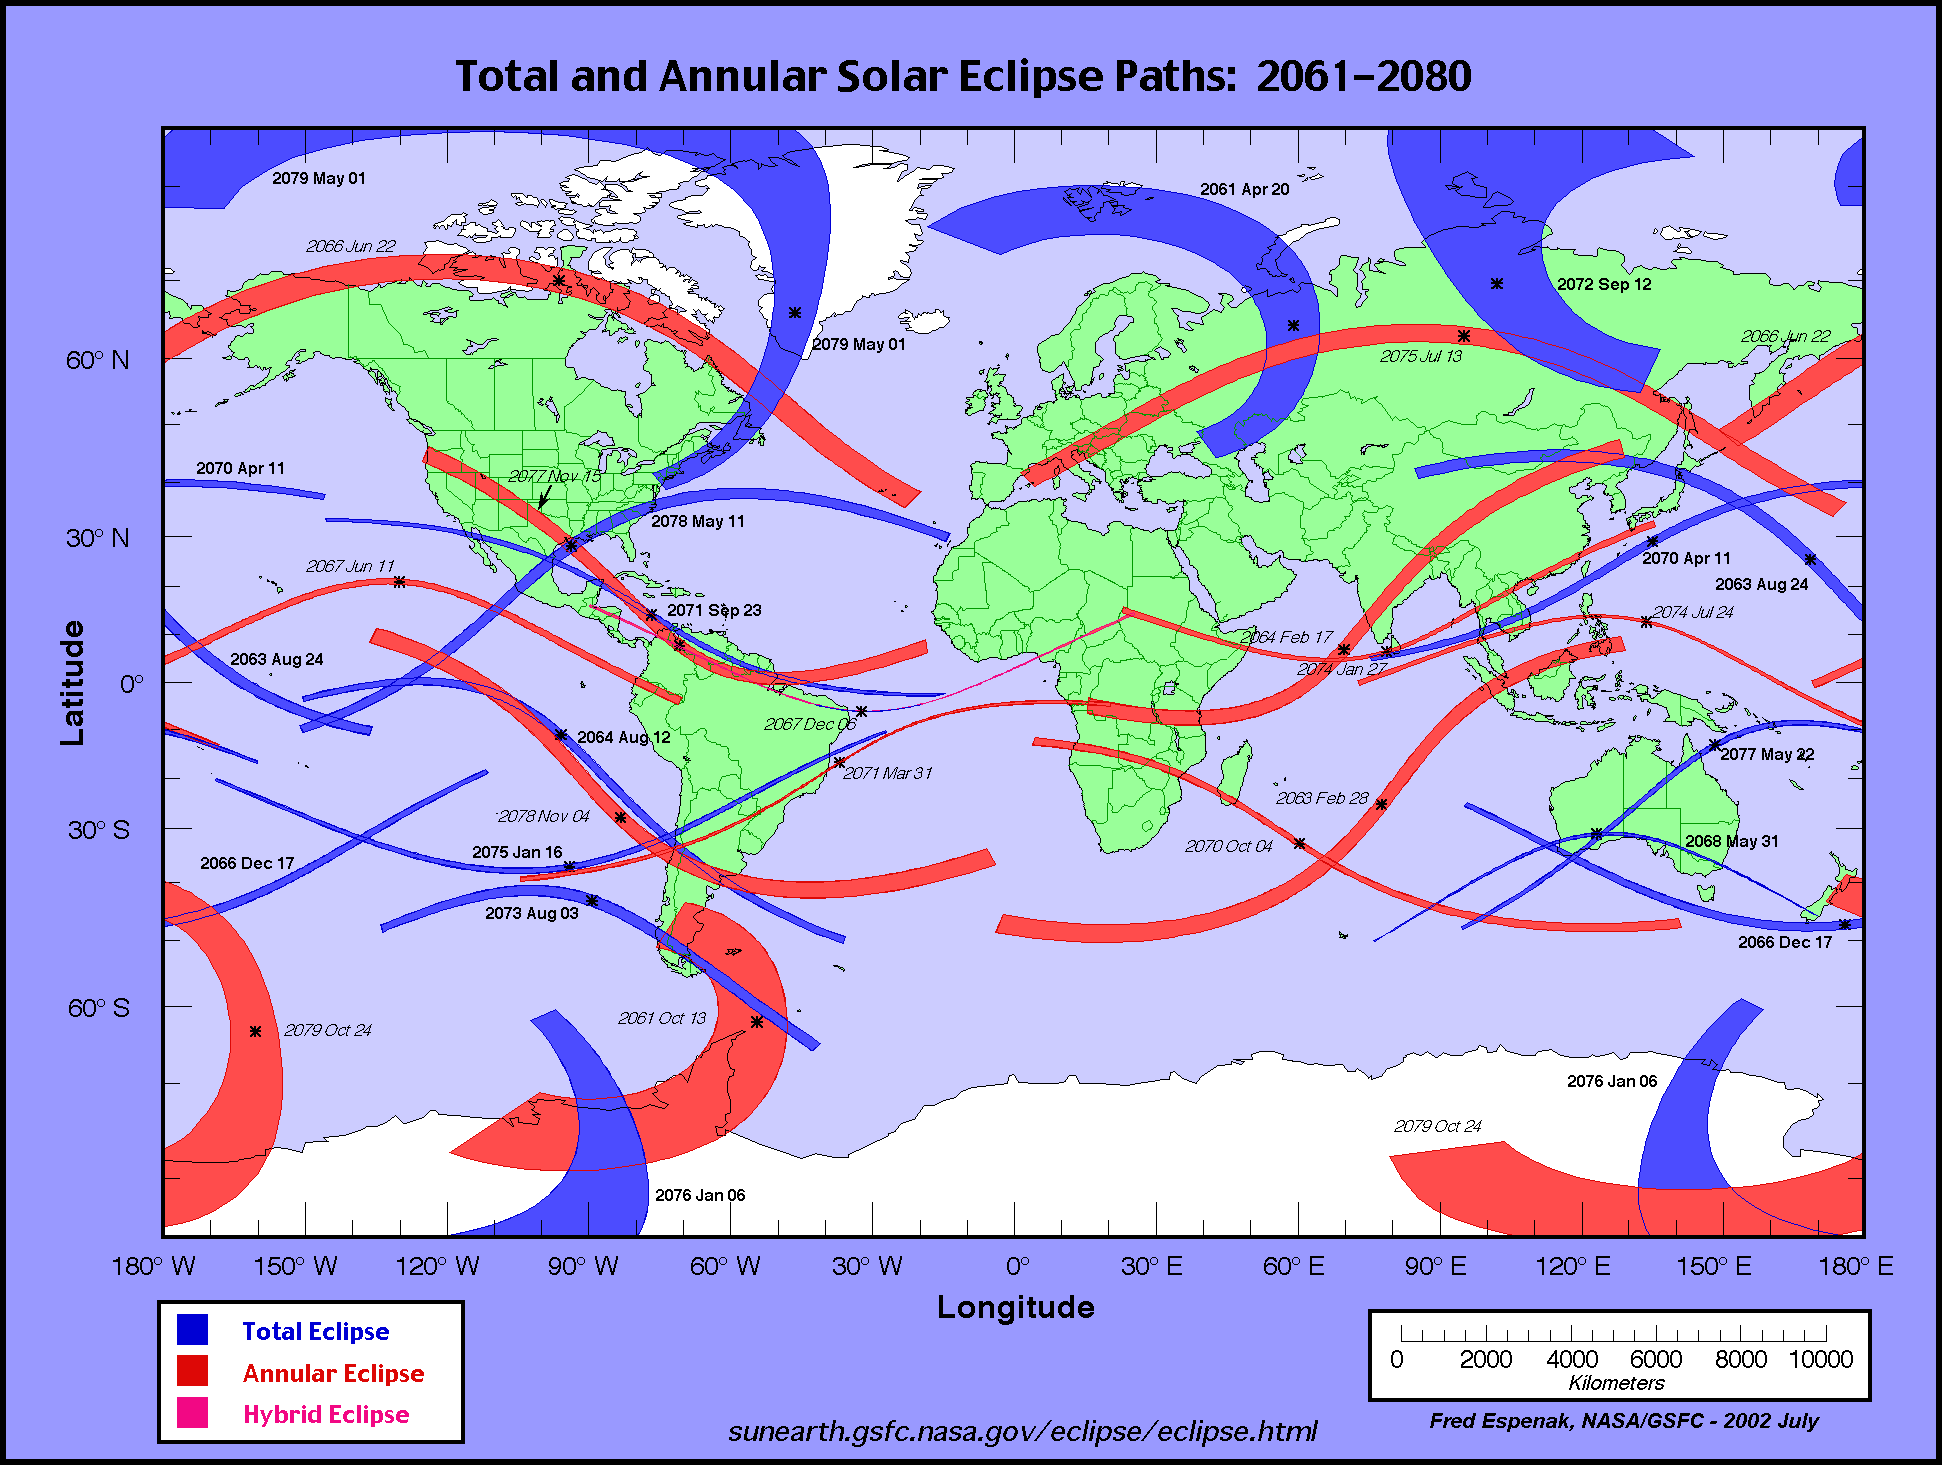 Calendar and solar eclipse maps from 2061 to 2080